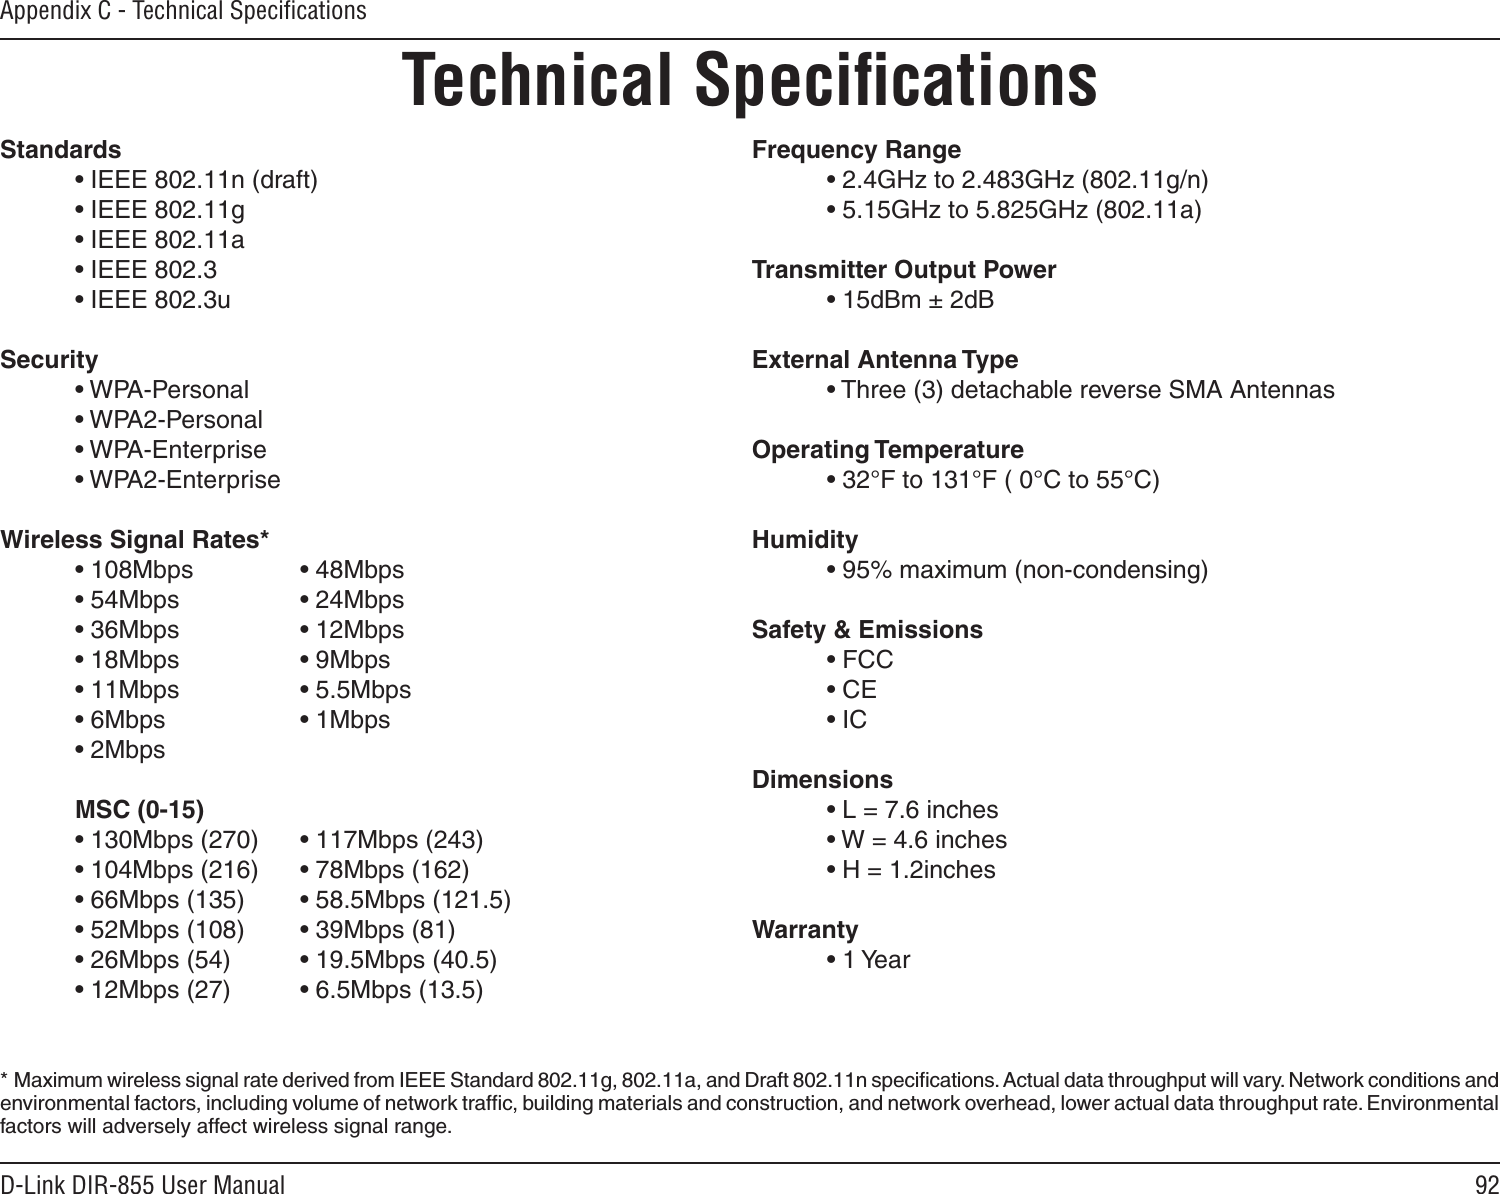 92D-Link DIR-855 User ManualAppendix C - Technical SpeciﬁcationsTechnical SpeciﬁcationsStandards  • IEEE 802.11n (draft)  • IEEE 802.11g  • IEEE 802.11a  • IEEE 802.3  • IEEE 802.3uSecurity  • WPA-Personal  • WPA2-Personal  • WPA-Enterprise  • WPA2-Enterprise Wireless Signal Rates* • 108Mbps     • 48Mbps  • 54Mbps     • 24Mbps  • 36Mbps    • 12Mbps  • 18Mbps     • 9Mbps  • 11Mbps     • 5.5Mbps  • 6Mbps     • 1Mbps  • 2Mbps       MSC (0-15)  • 130Mbps (270)  • 117Mbps (243)  • 104Mbps (216)  • 78Mbps (162)  • 66Mbps (135)  • 58.5Mbps (121.5)  • 52Mbps (108)  • 39Mbps (81)  • 26Mbps (54)  • 19.5Mbps (40.5)  • 12Mbps (27)  • 6.5Mbps (13.5) Frequency Range  • 2.4GHz to 2.483GHz (802.11g/n)  • 5.15GHz to 5.825GHz (802.11a)Transmitter Output Power  • 15dBm ± 2dBExternal Antenna Type  • Three (3) detachable reverse SMA AntennasOperating Temperature  • 32°F to 131°F ( 0°C to 55°C)Humidity  • 95% maximum (non-condensing)Safety &amp; Emissions  • FCC    • CE  • ICDimensions  • L = 7.6 inches  • W = 4.6 inches  • H = 1.2inchesWarranty  • 1 Year*  Maximum wireless signal rate derived from IEEE Standard 802.11g, 802.11a, and Draft 802.11n speciﬁcations. Actual data throughput will vary. Network conditions and environmental factors, including volume of network trafﬁc, building materials and construction, and network overhead, lower actual data throughput rate. Environmental factors will adversely affect wireless signal range.